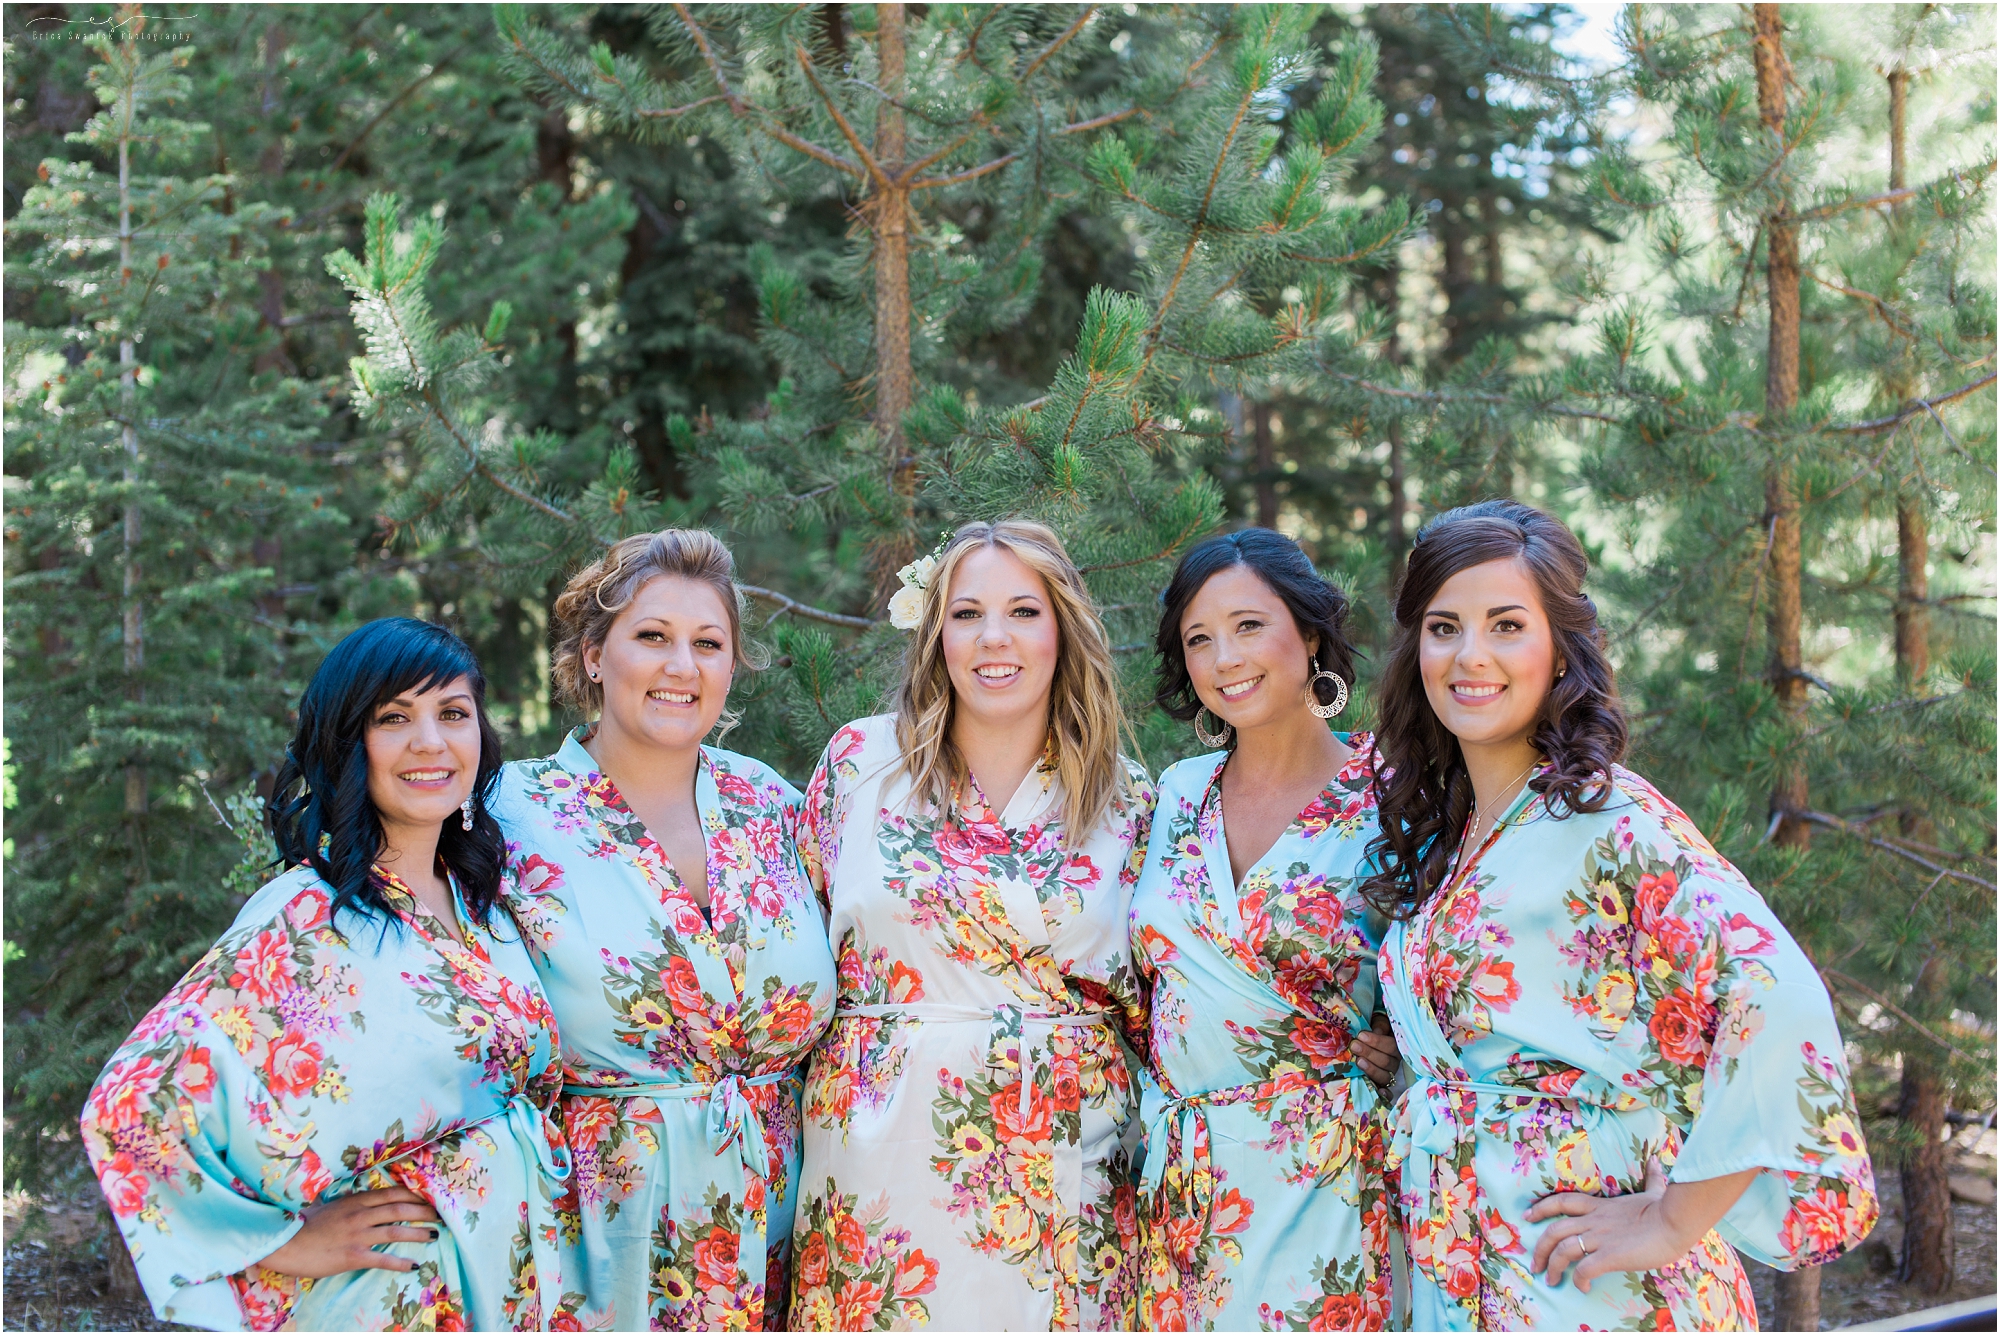 Beautiful bride and bridesmaids wearing floral robes as they get ready for the day.